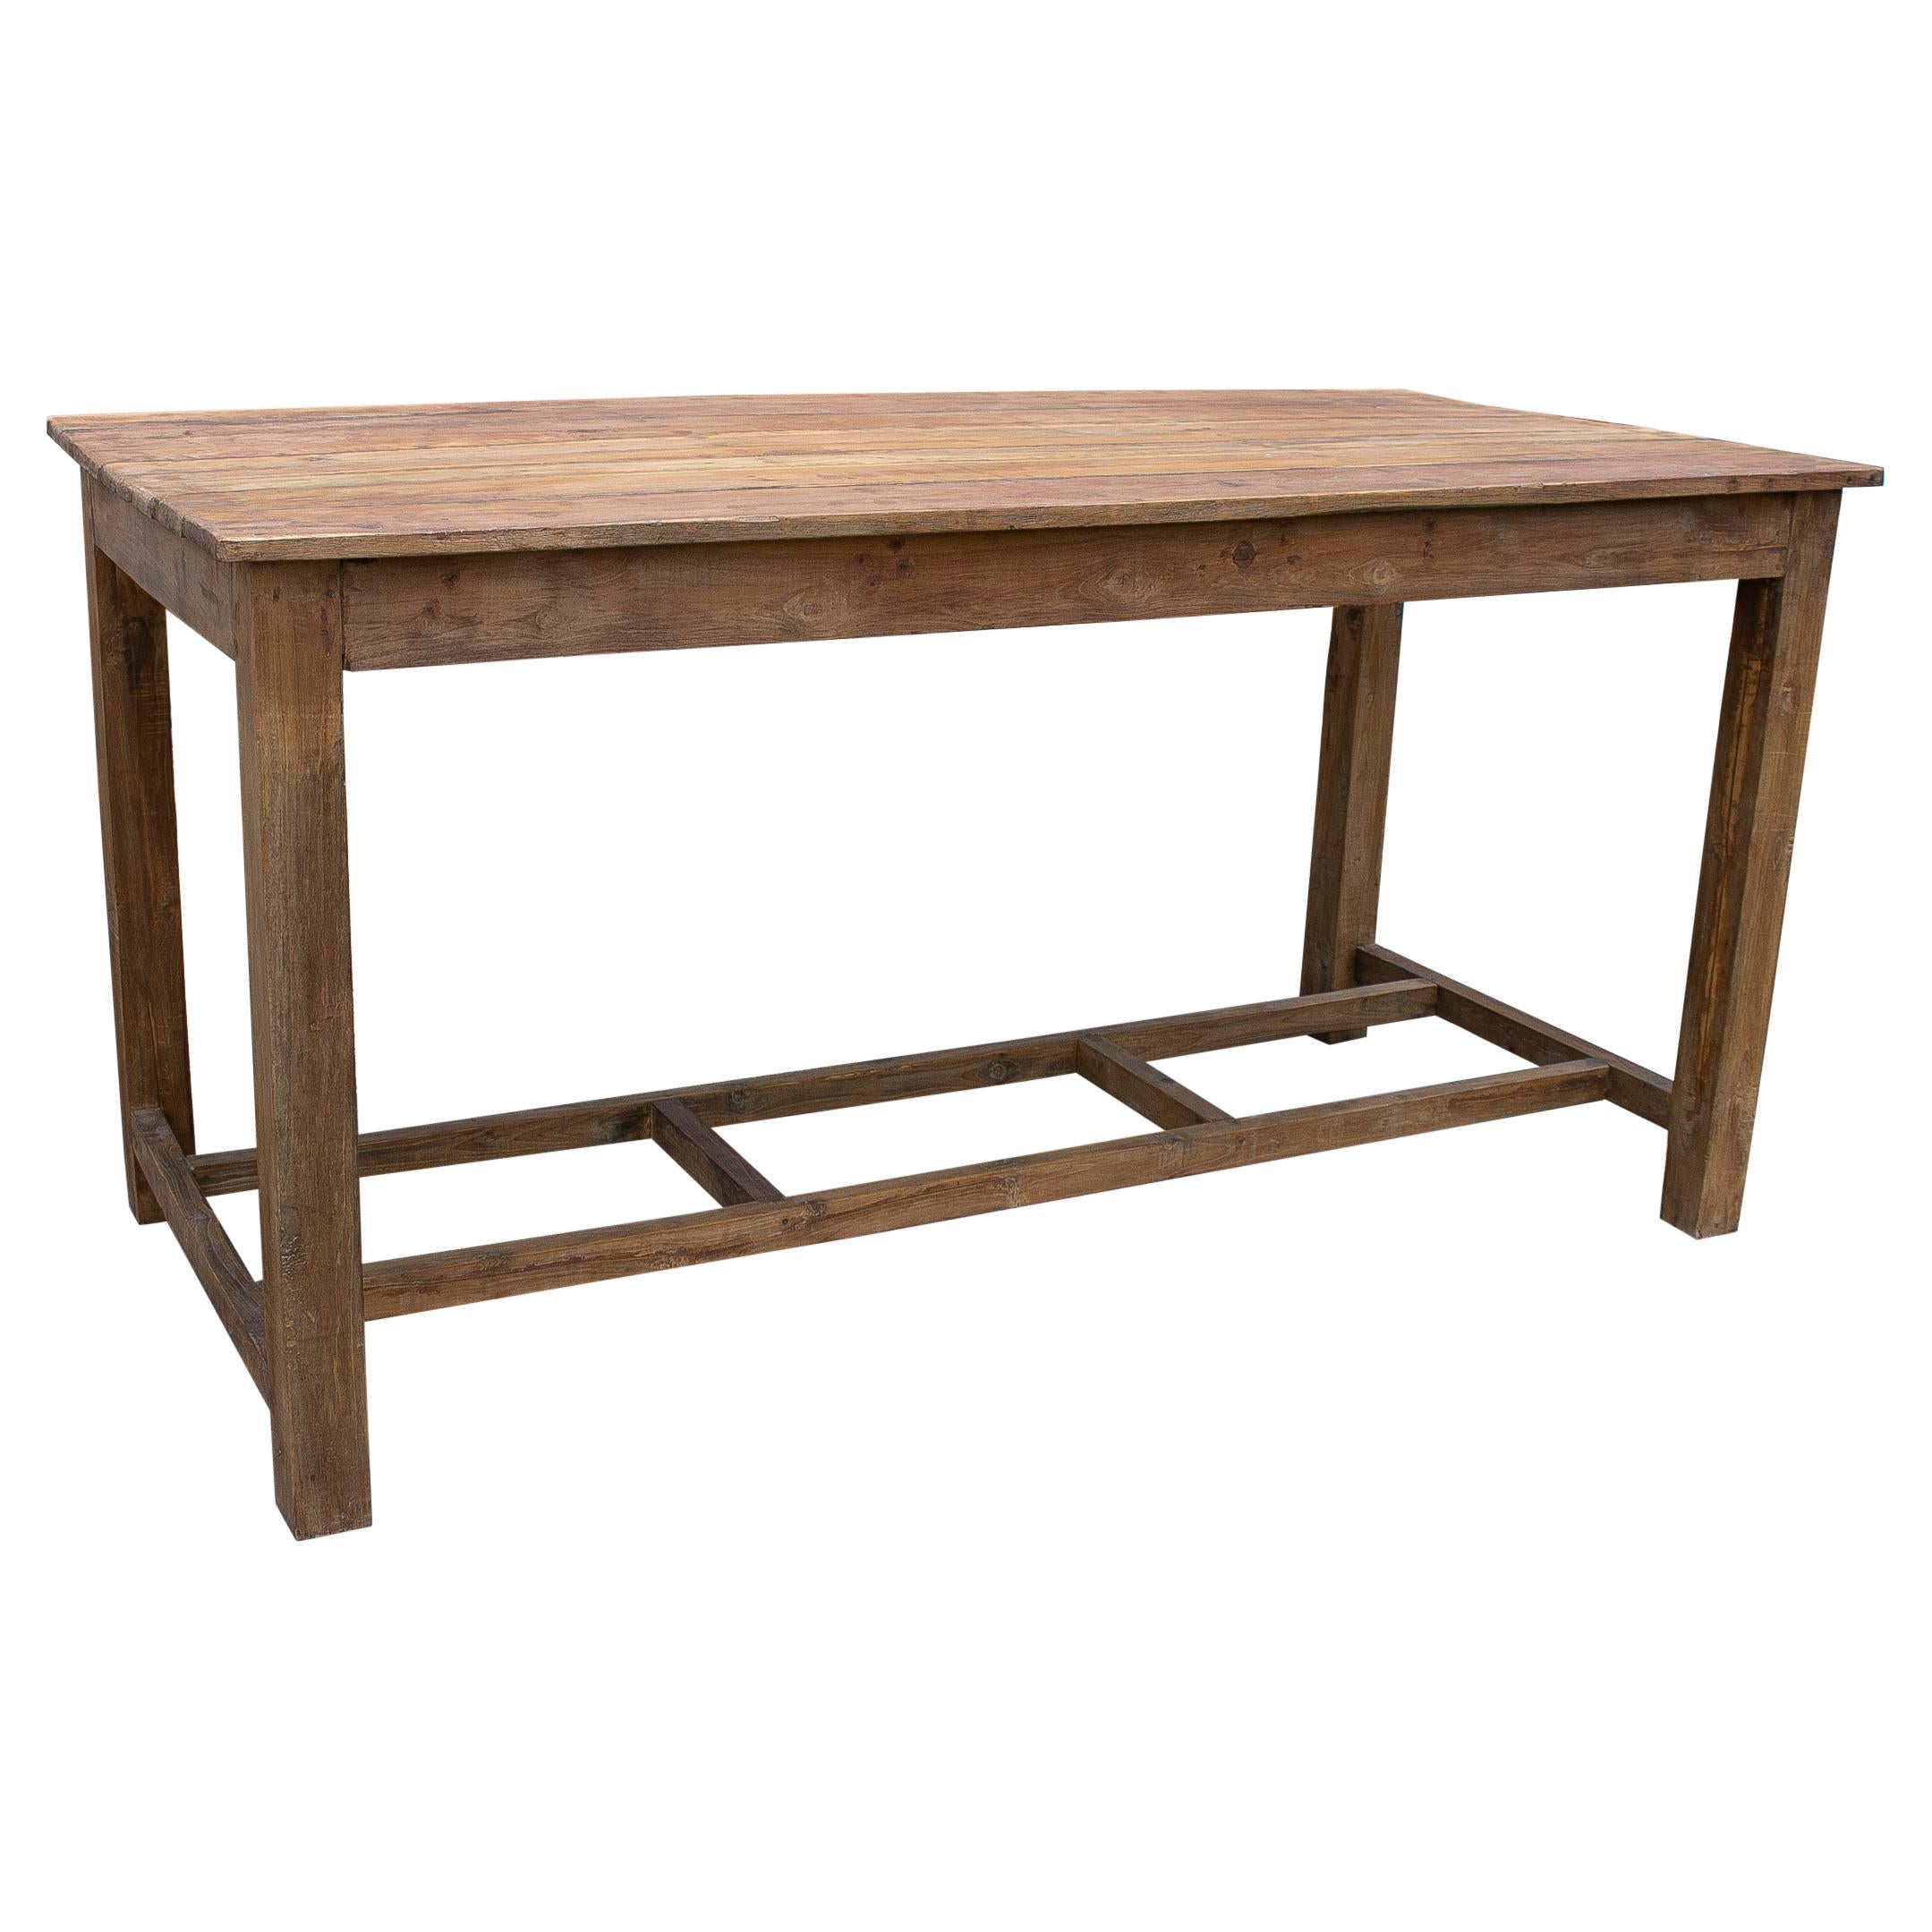 1970s Spanish Natural Wood Rustic Farmhouse Working Table w/ Beams For Sale